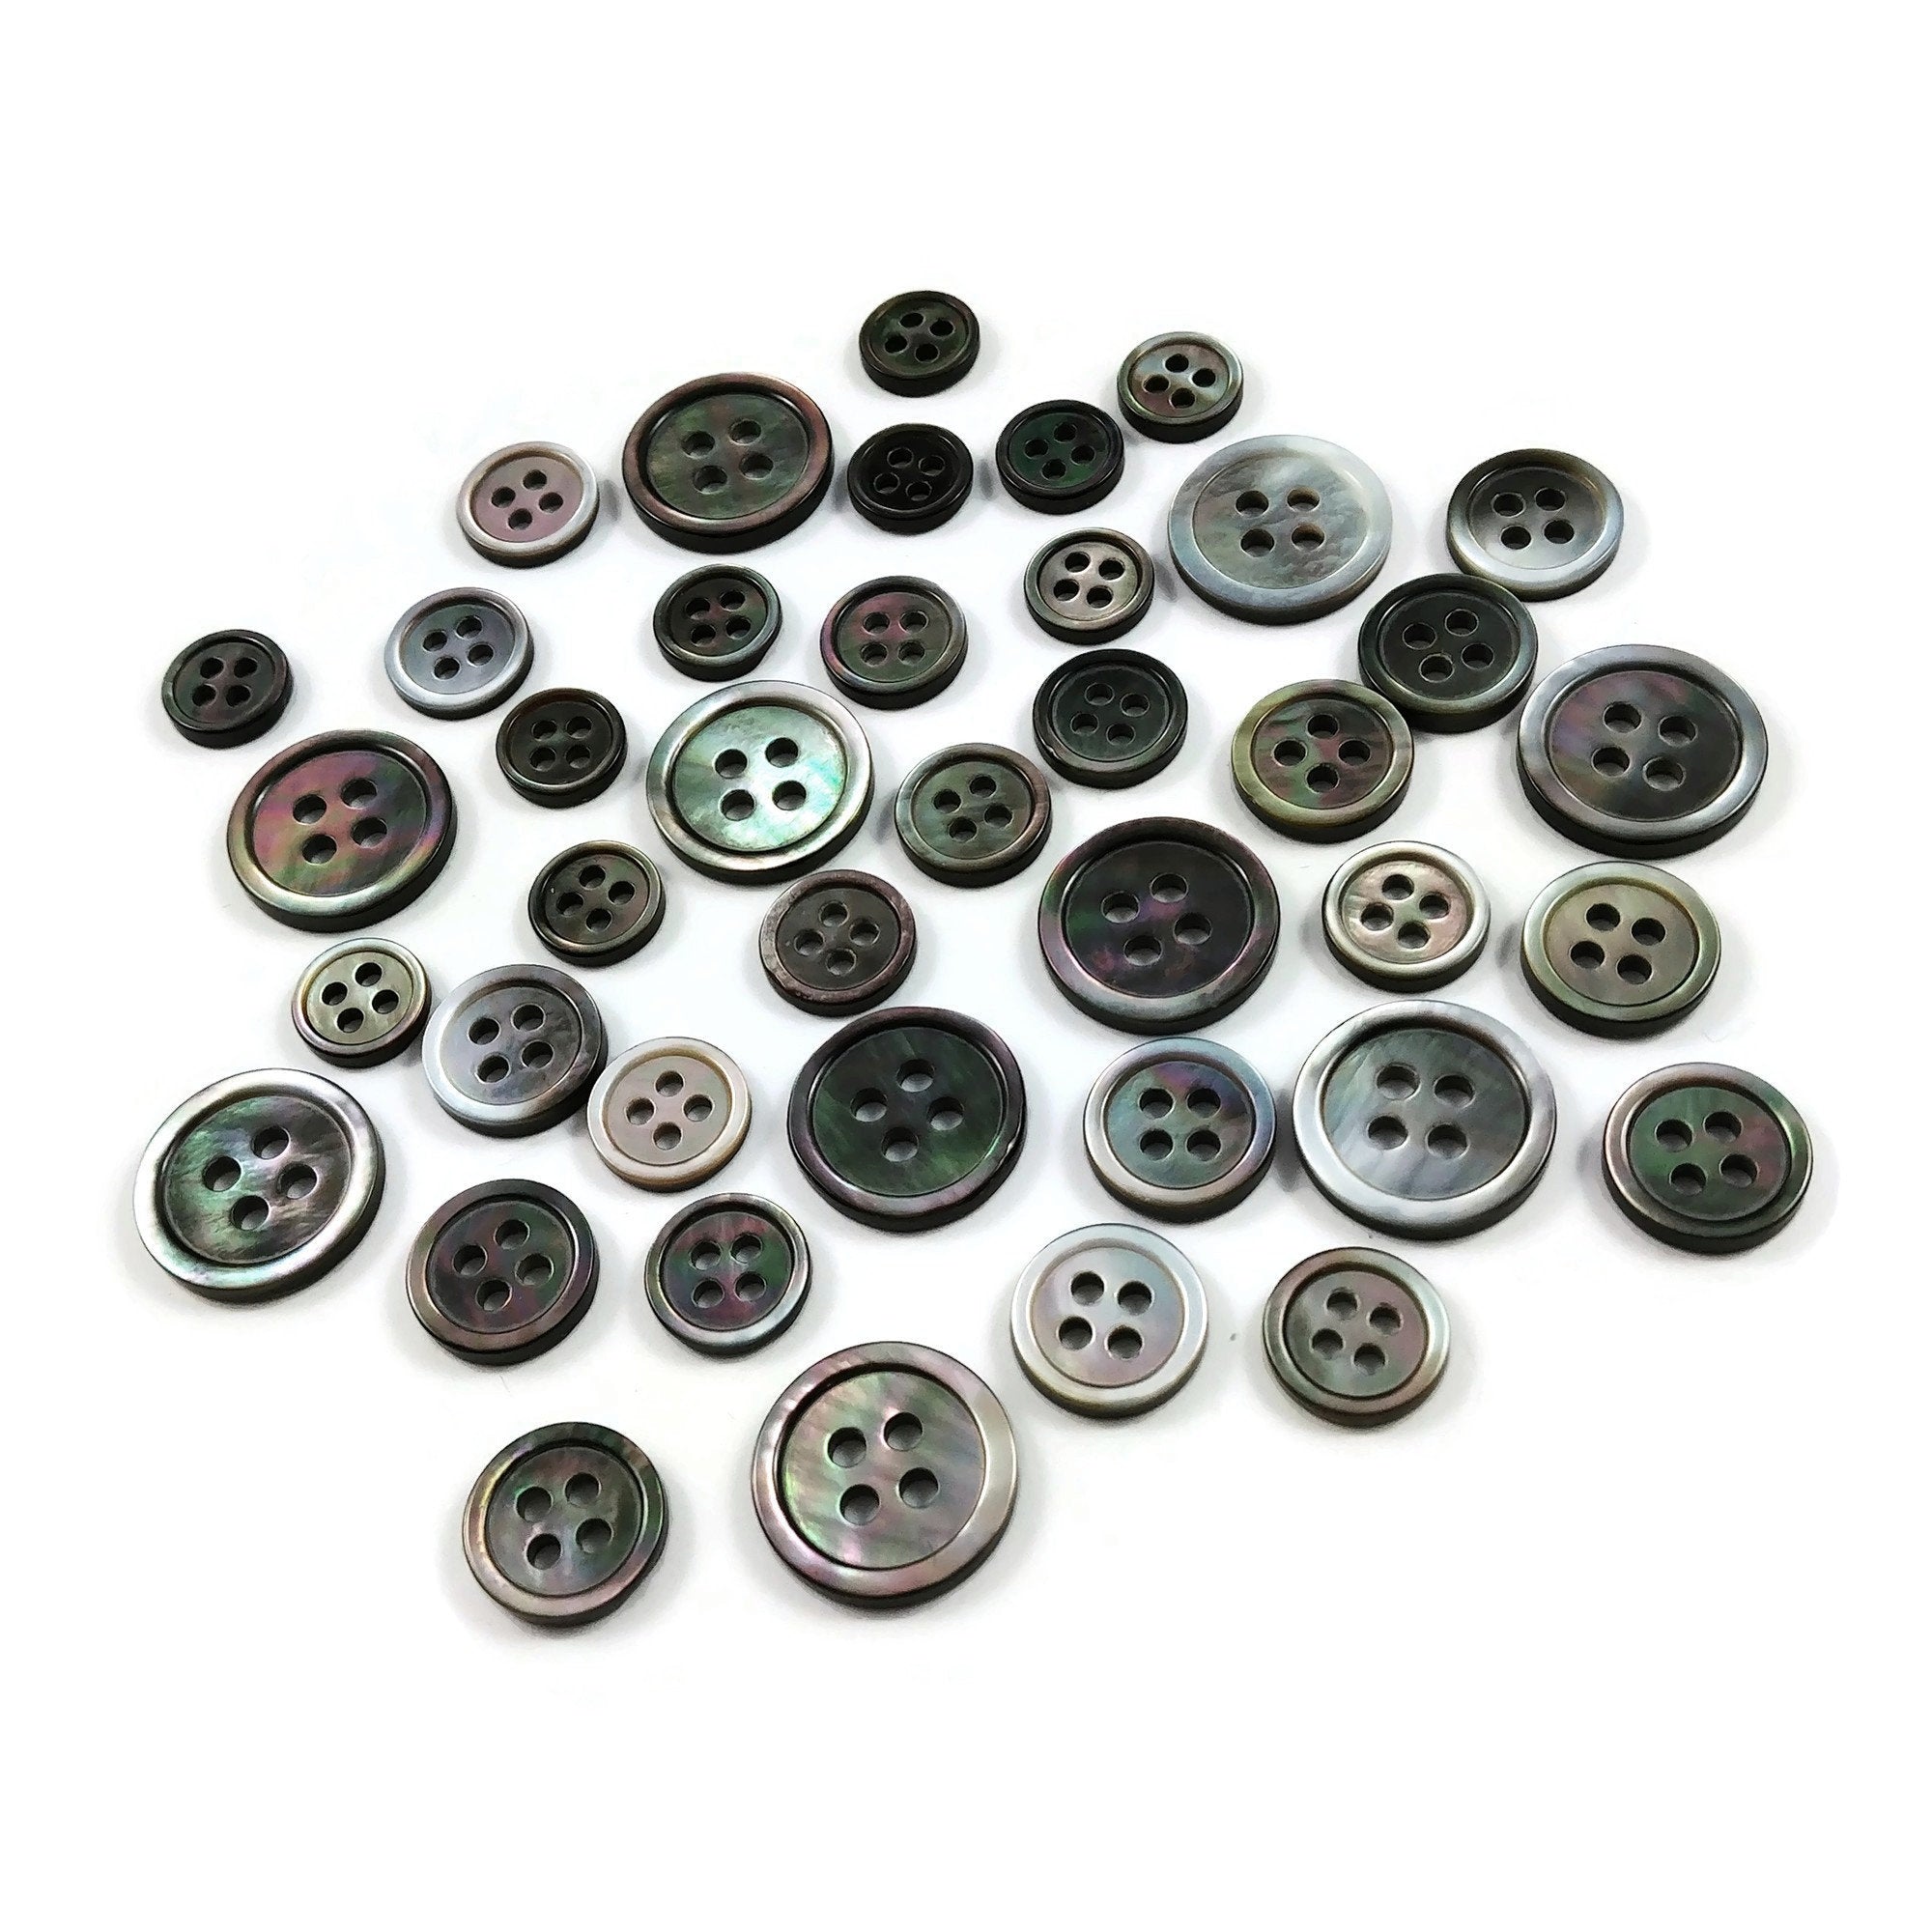 10 Flower wood painted sewing buttons - blue, green and purple 15mm